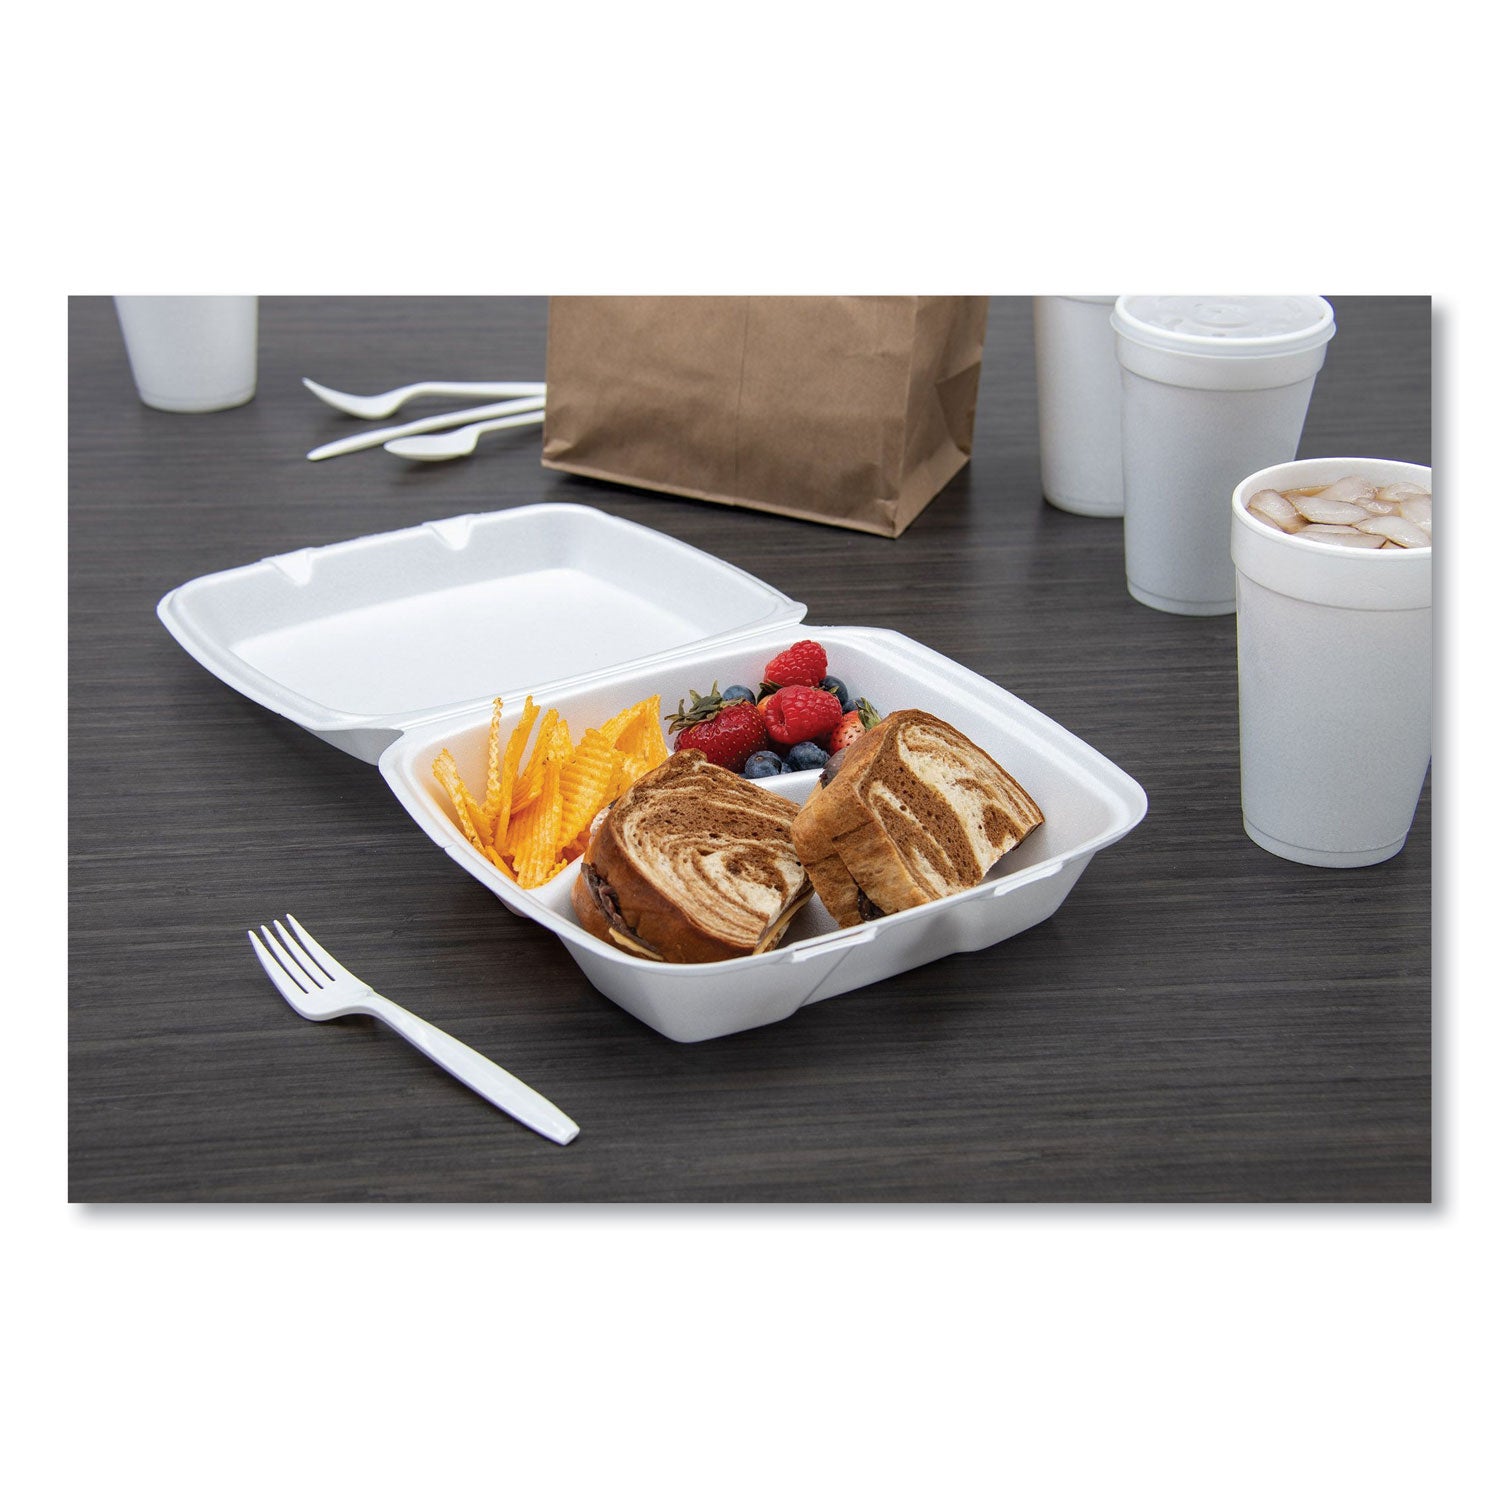 Foam Hinged Lid Containers, 3-Compartment, 8.38 x 7.78 x 3.25, 200/Carton - 